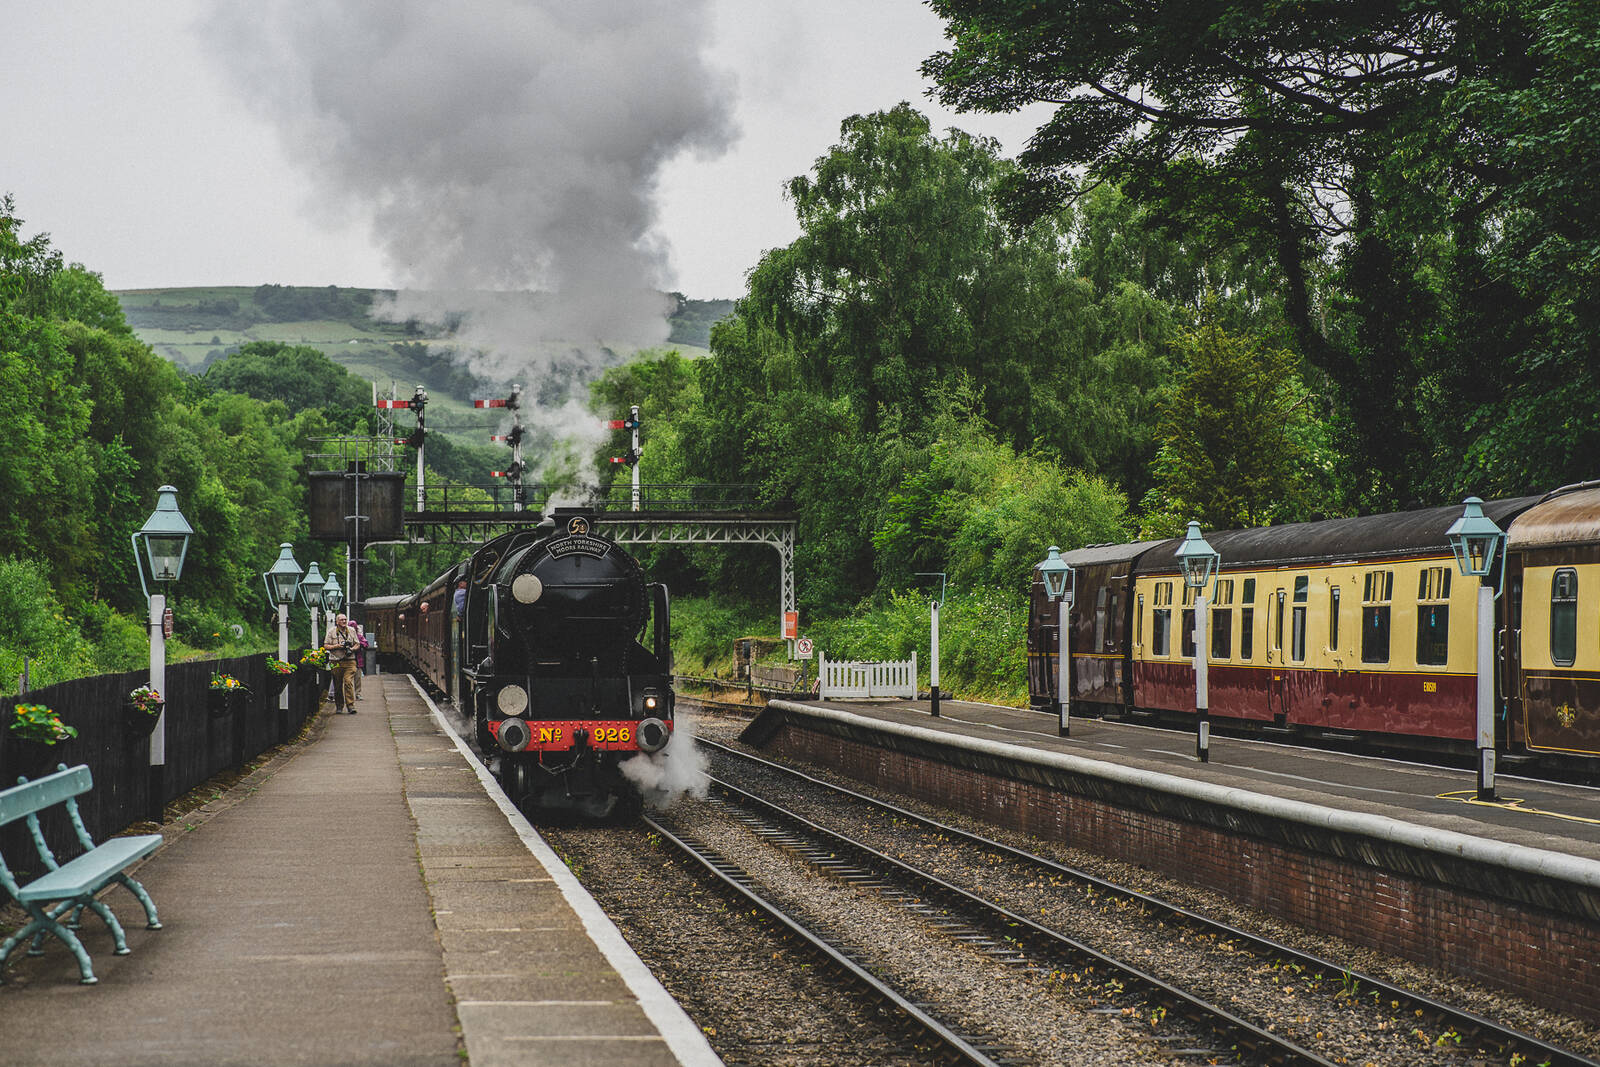 Image of Grosmont Station by James Billings.